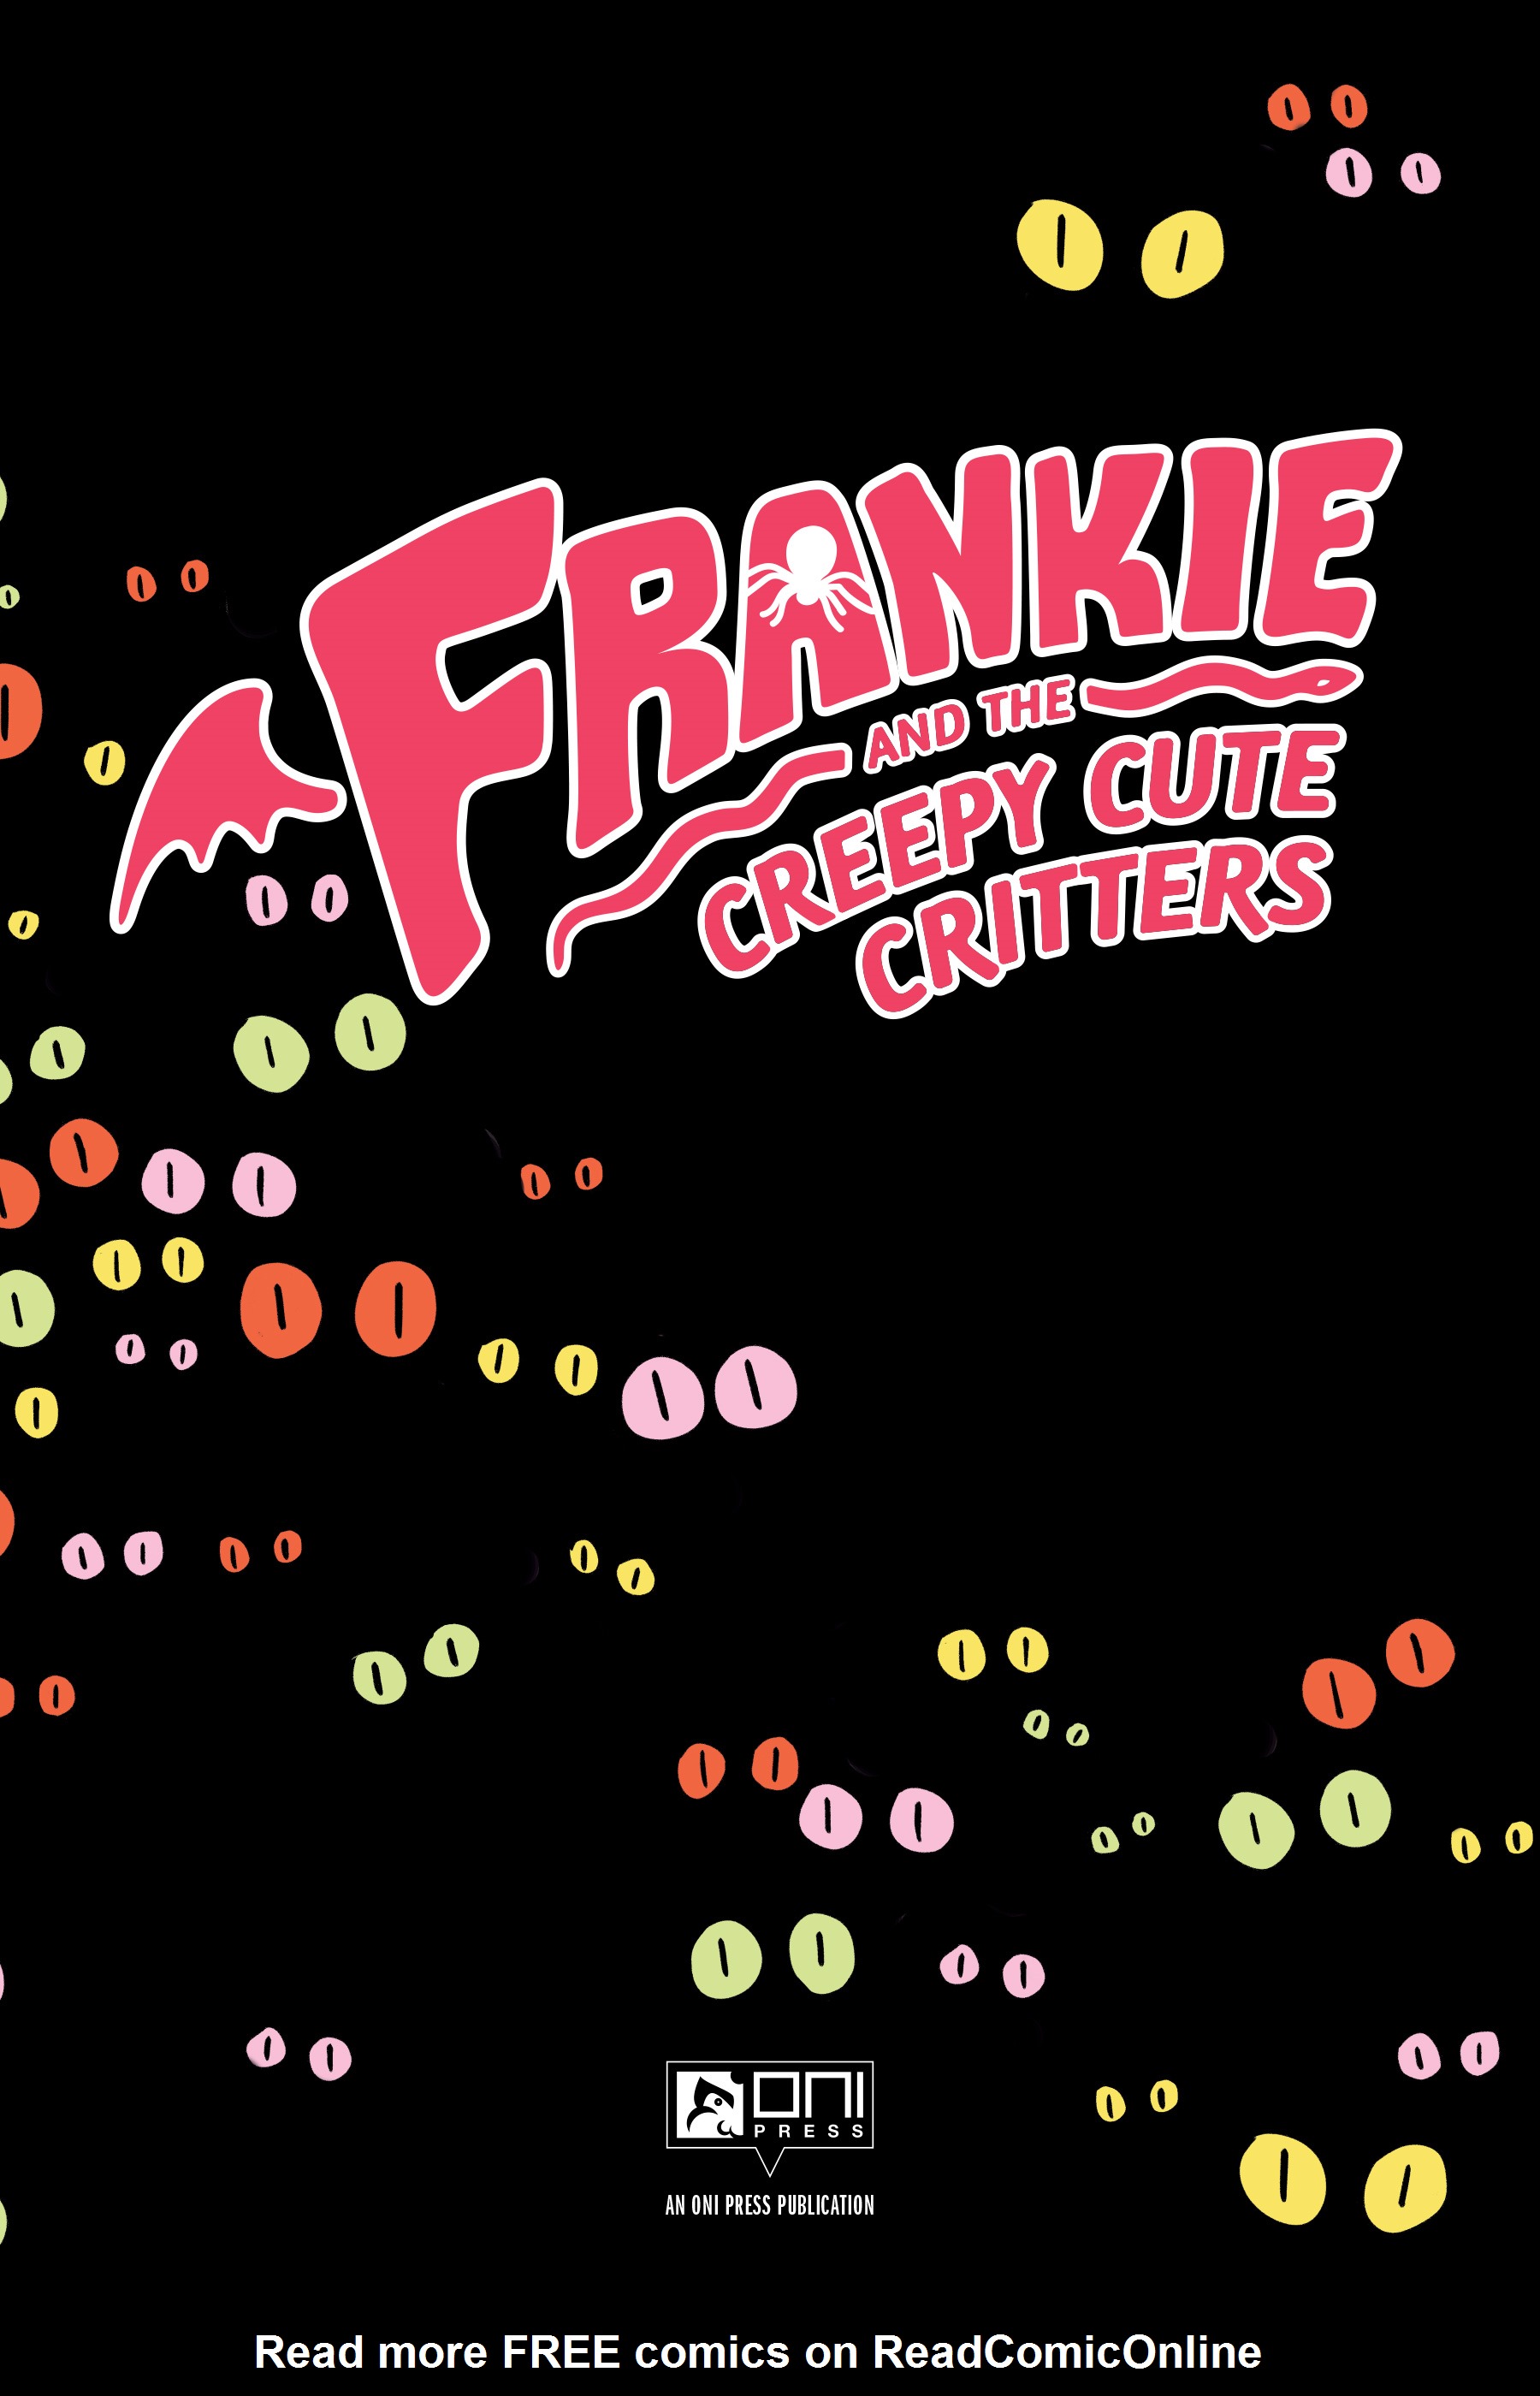 Read online Frankie and the Creepy Cute Critters comic -  Issue # Full - 2